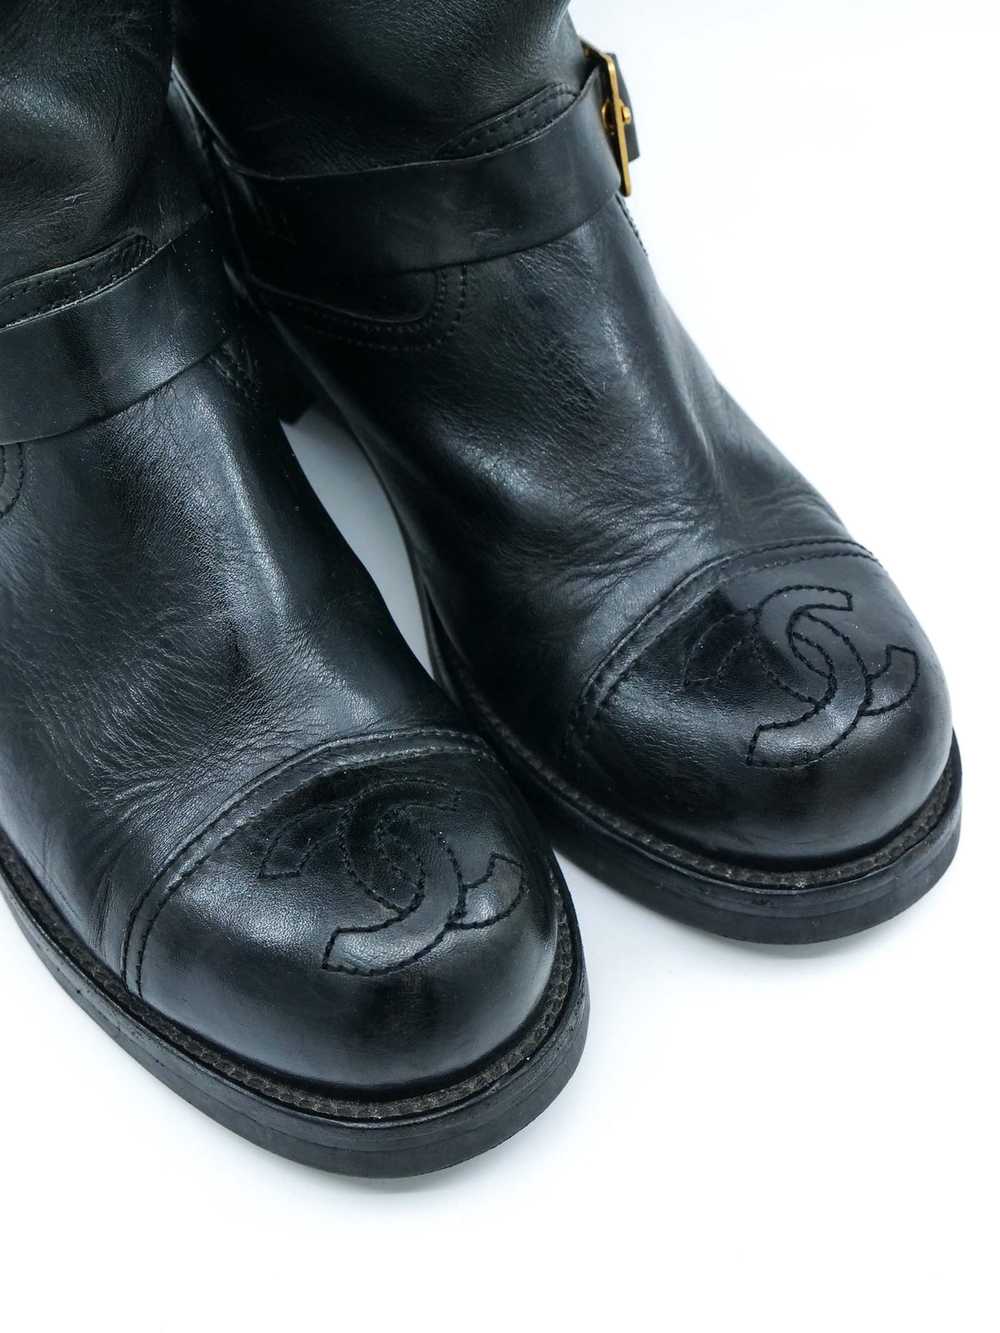 1990s Chanel Motorcycle Boots - image 2